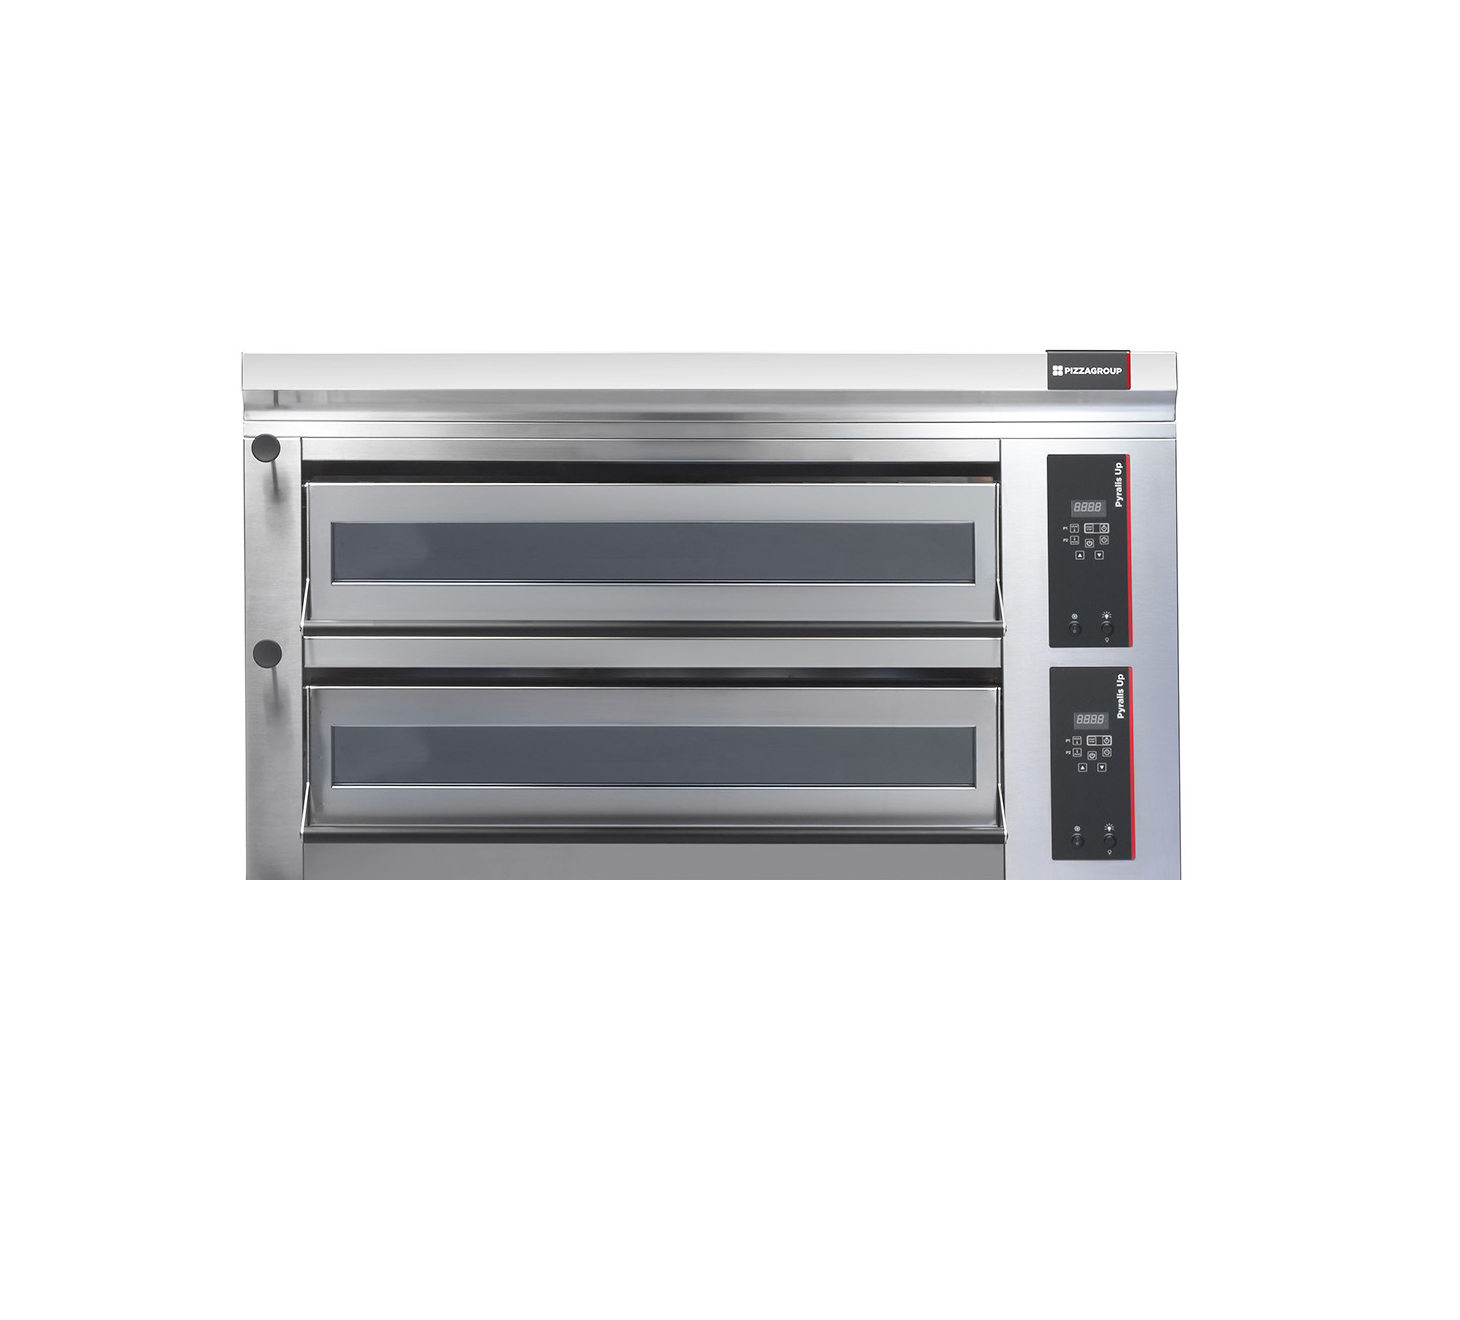 PIZZAGROUP Pyralis Up PY-UP D18 Double Deck Electric Pizza Oven